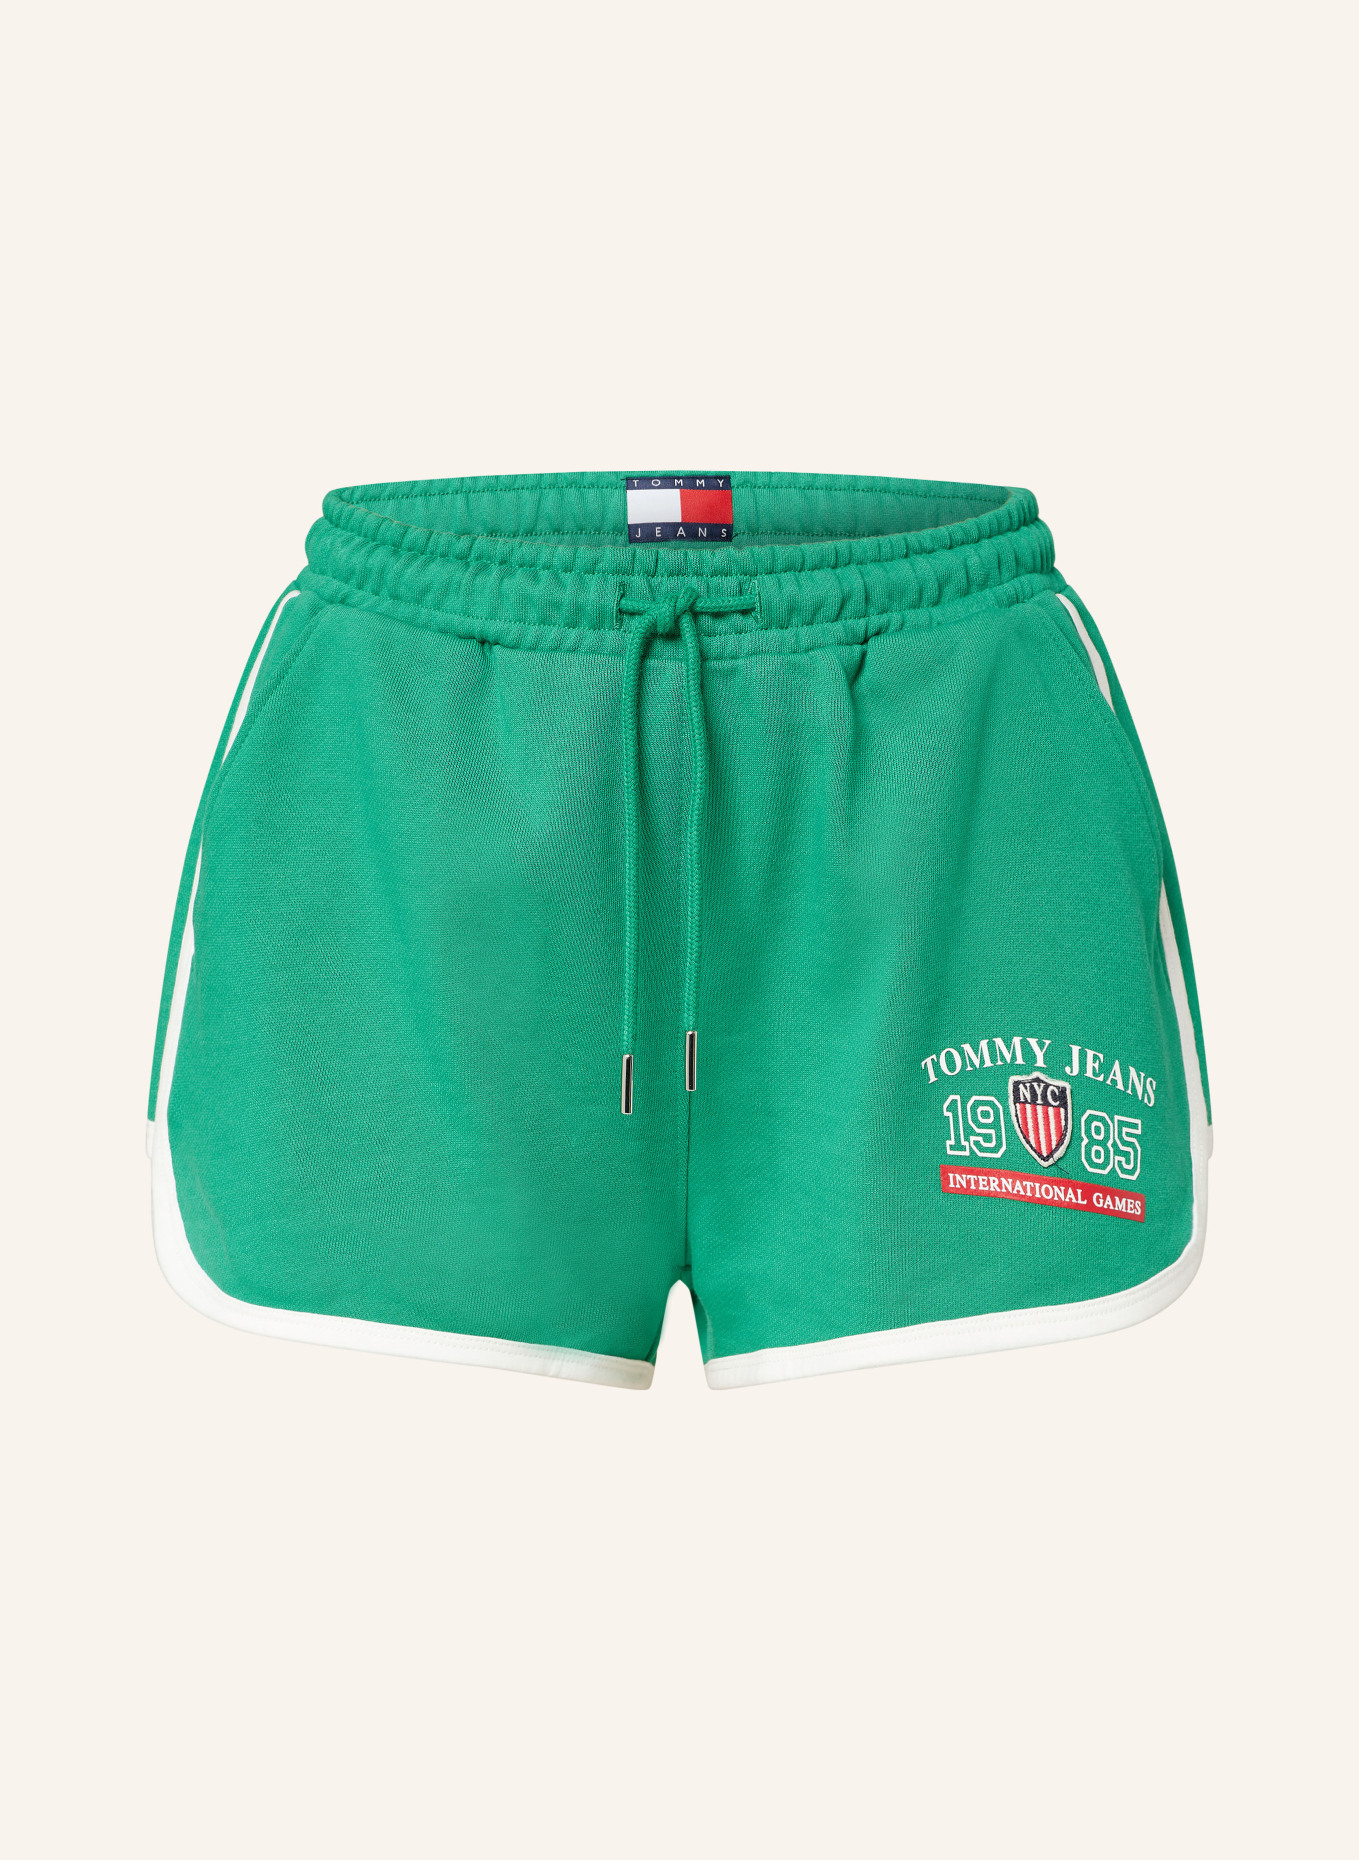 TOMMY JEANS Sweat shorts, Color: GREEN/ WHITE/ RED (Image 1)